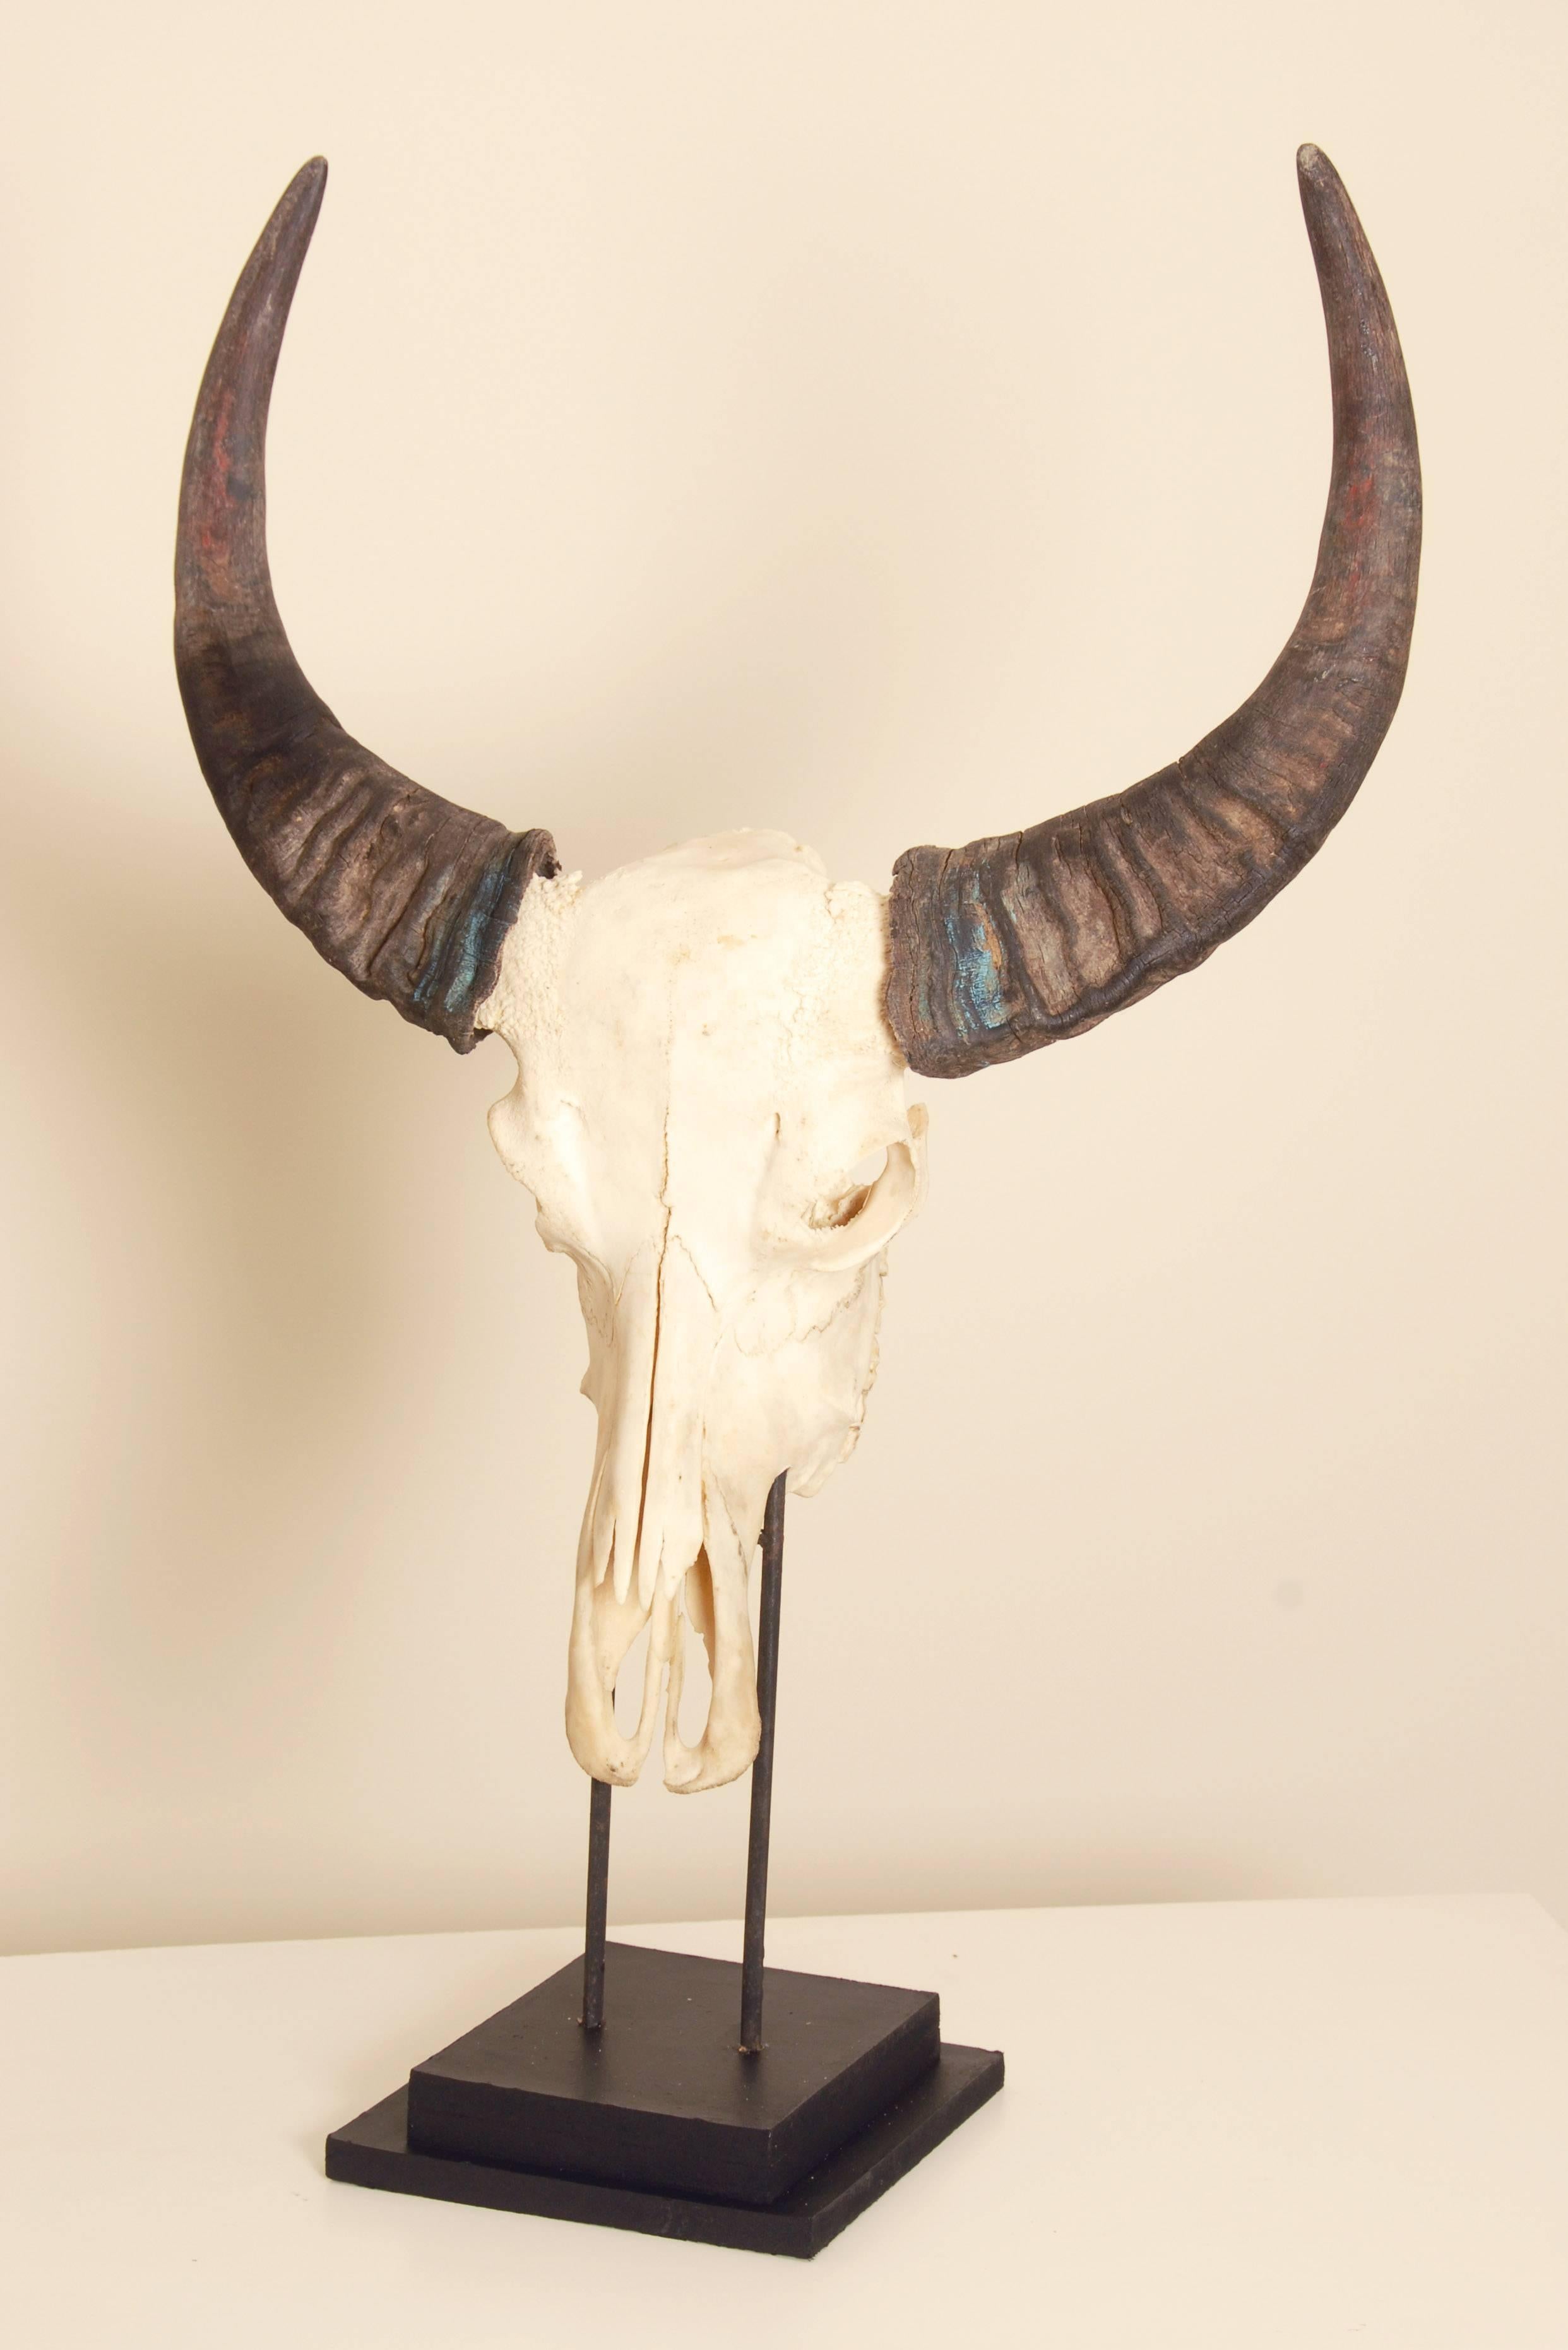 Large 20th century water buffalo skull and horns with cast iron support.
Horns pull off the skull and the skull pulls off the support for easy transportation.
Measure: 37 inches high.